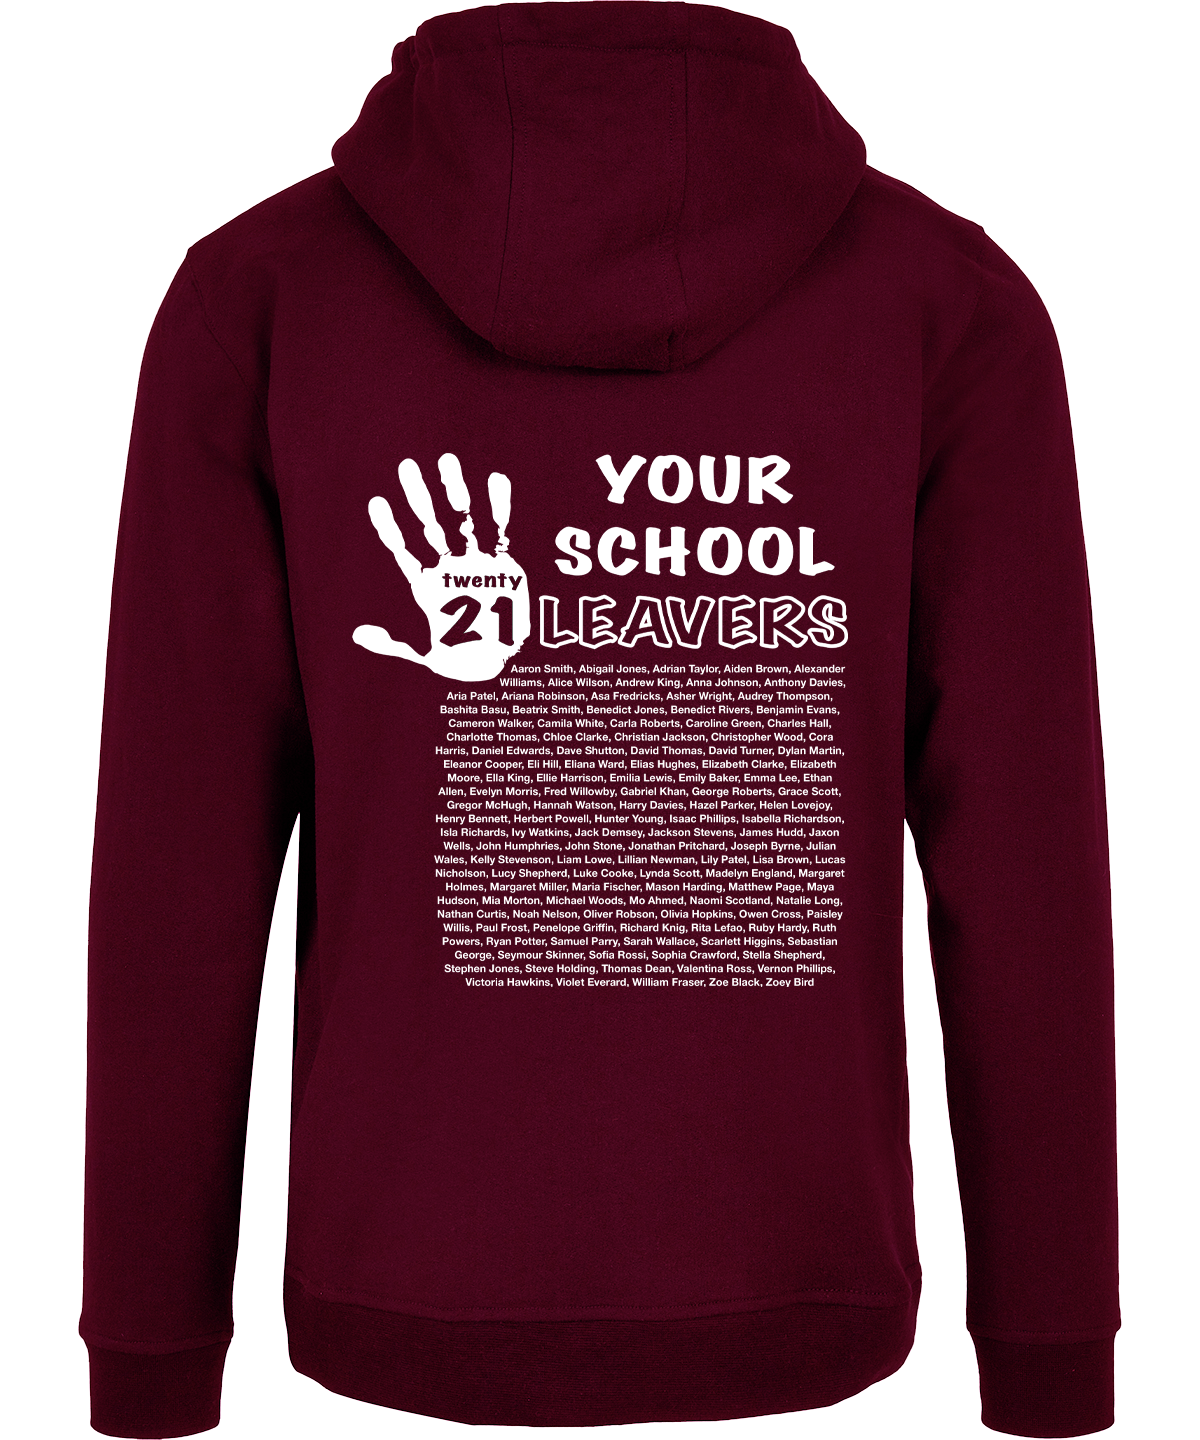 school leavers hoodies embroidered front